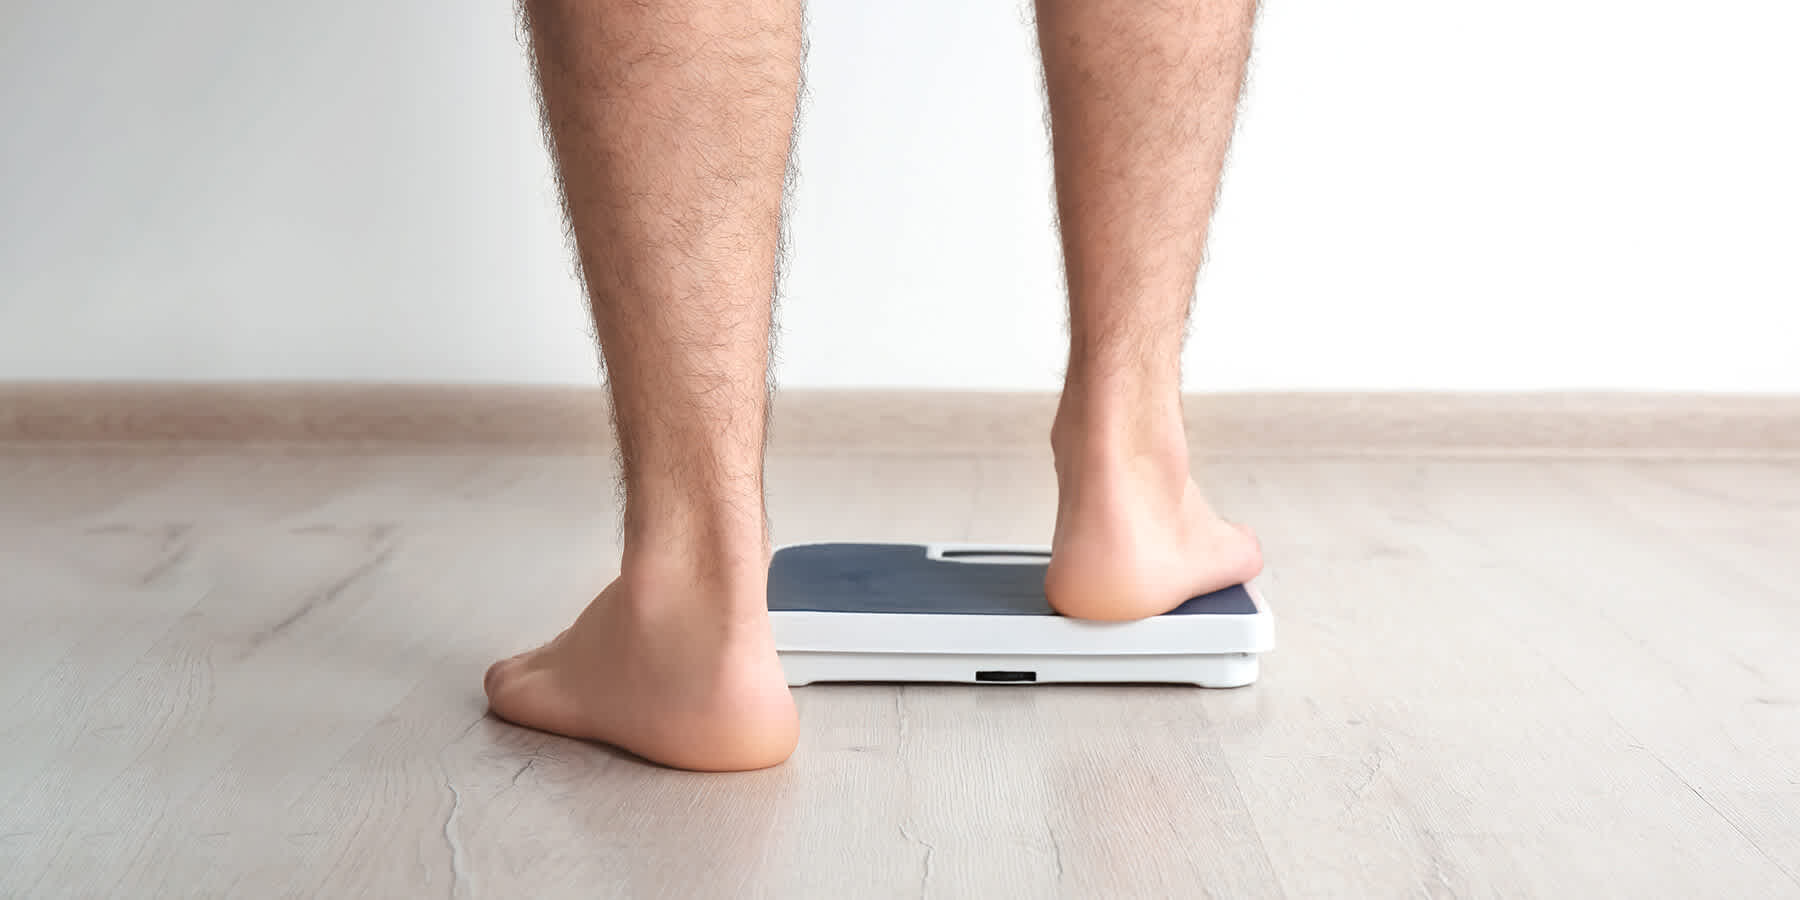 Person stepping on bathroom scale and wondering if obesity is a disease